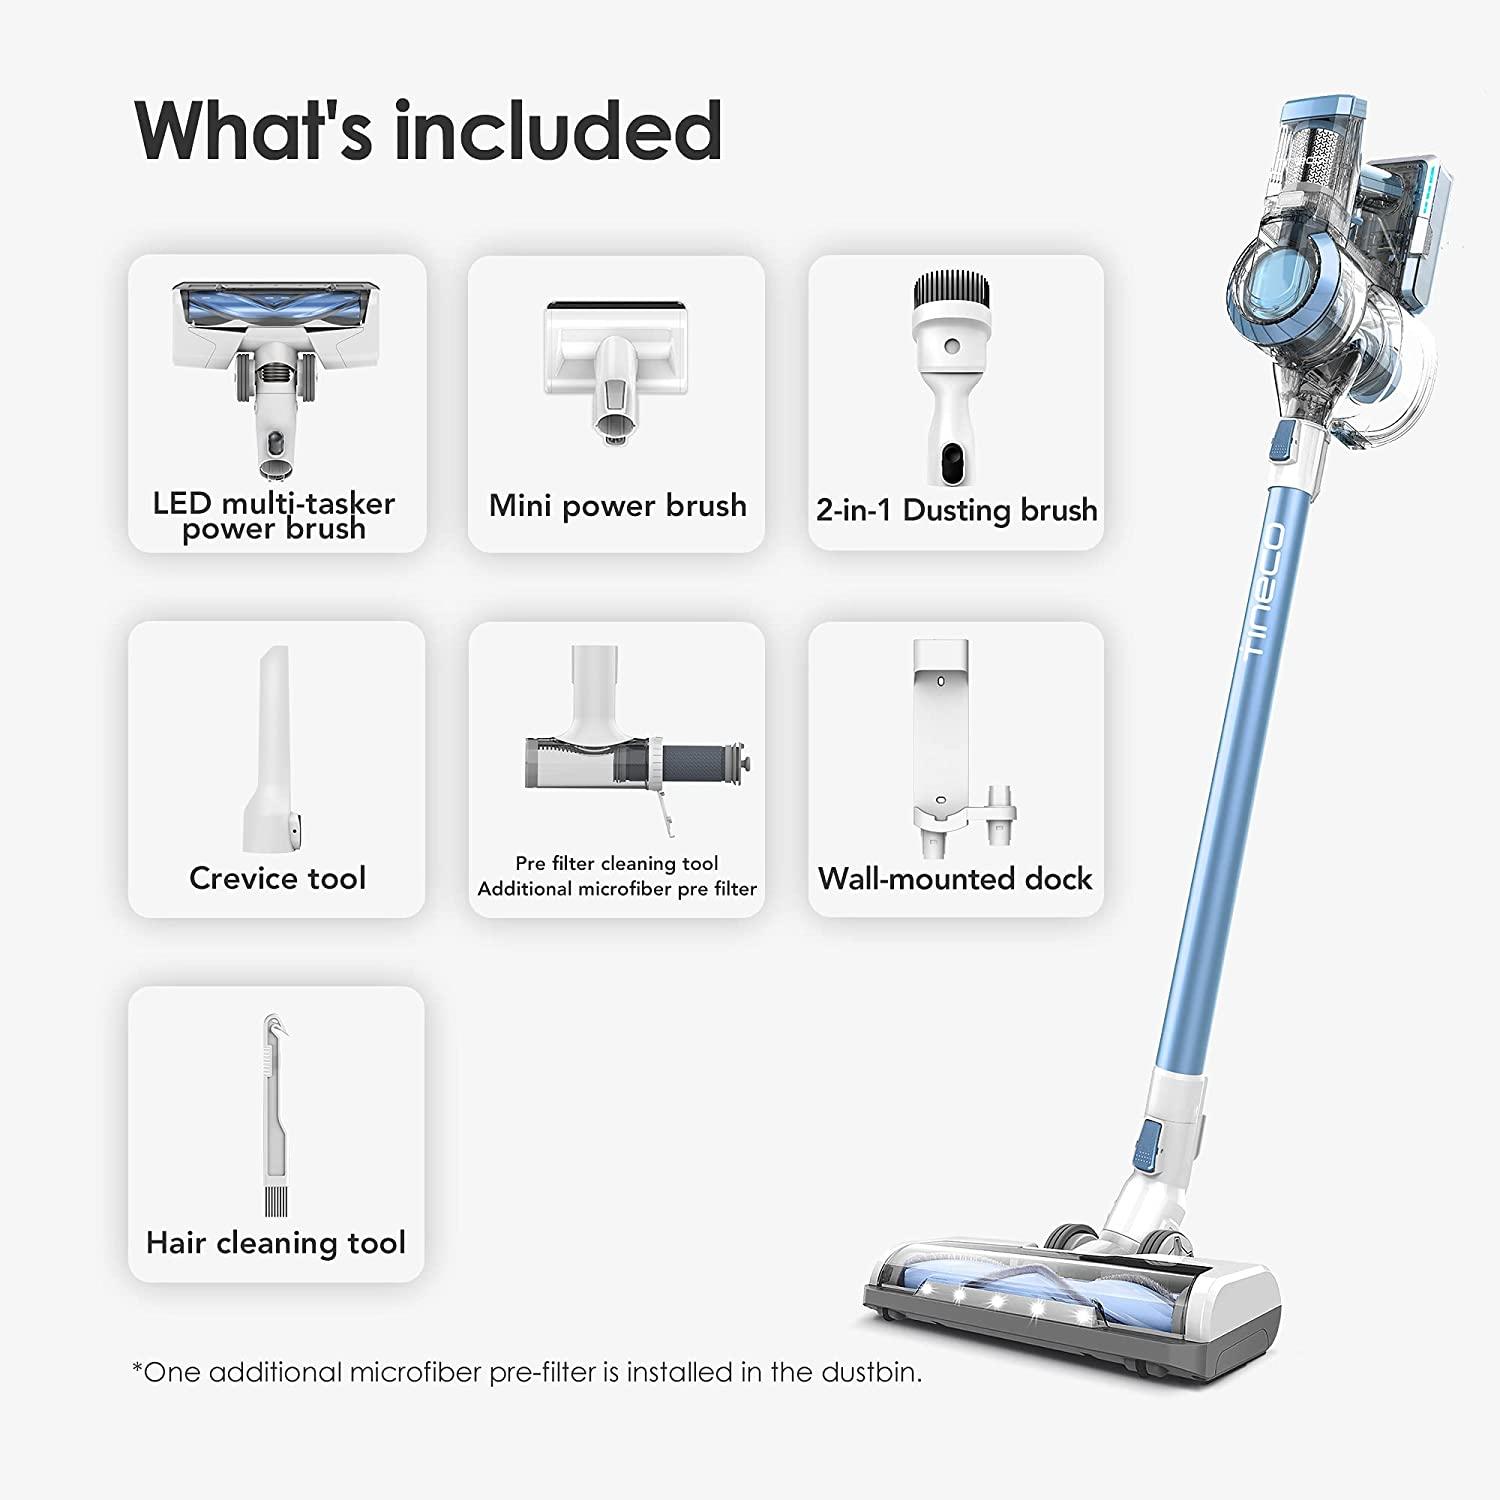 Lightweight and Rechargeable Wall Mounted Design 2 in 1 Upright Stick and Handheld Powerful Suction Vacuum Cleaner with Cordless Design and HEPA Filter